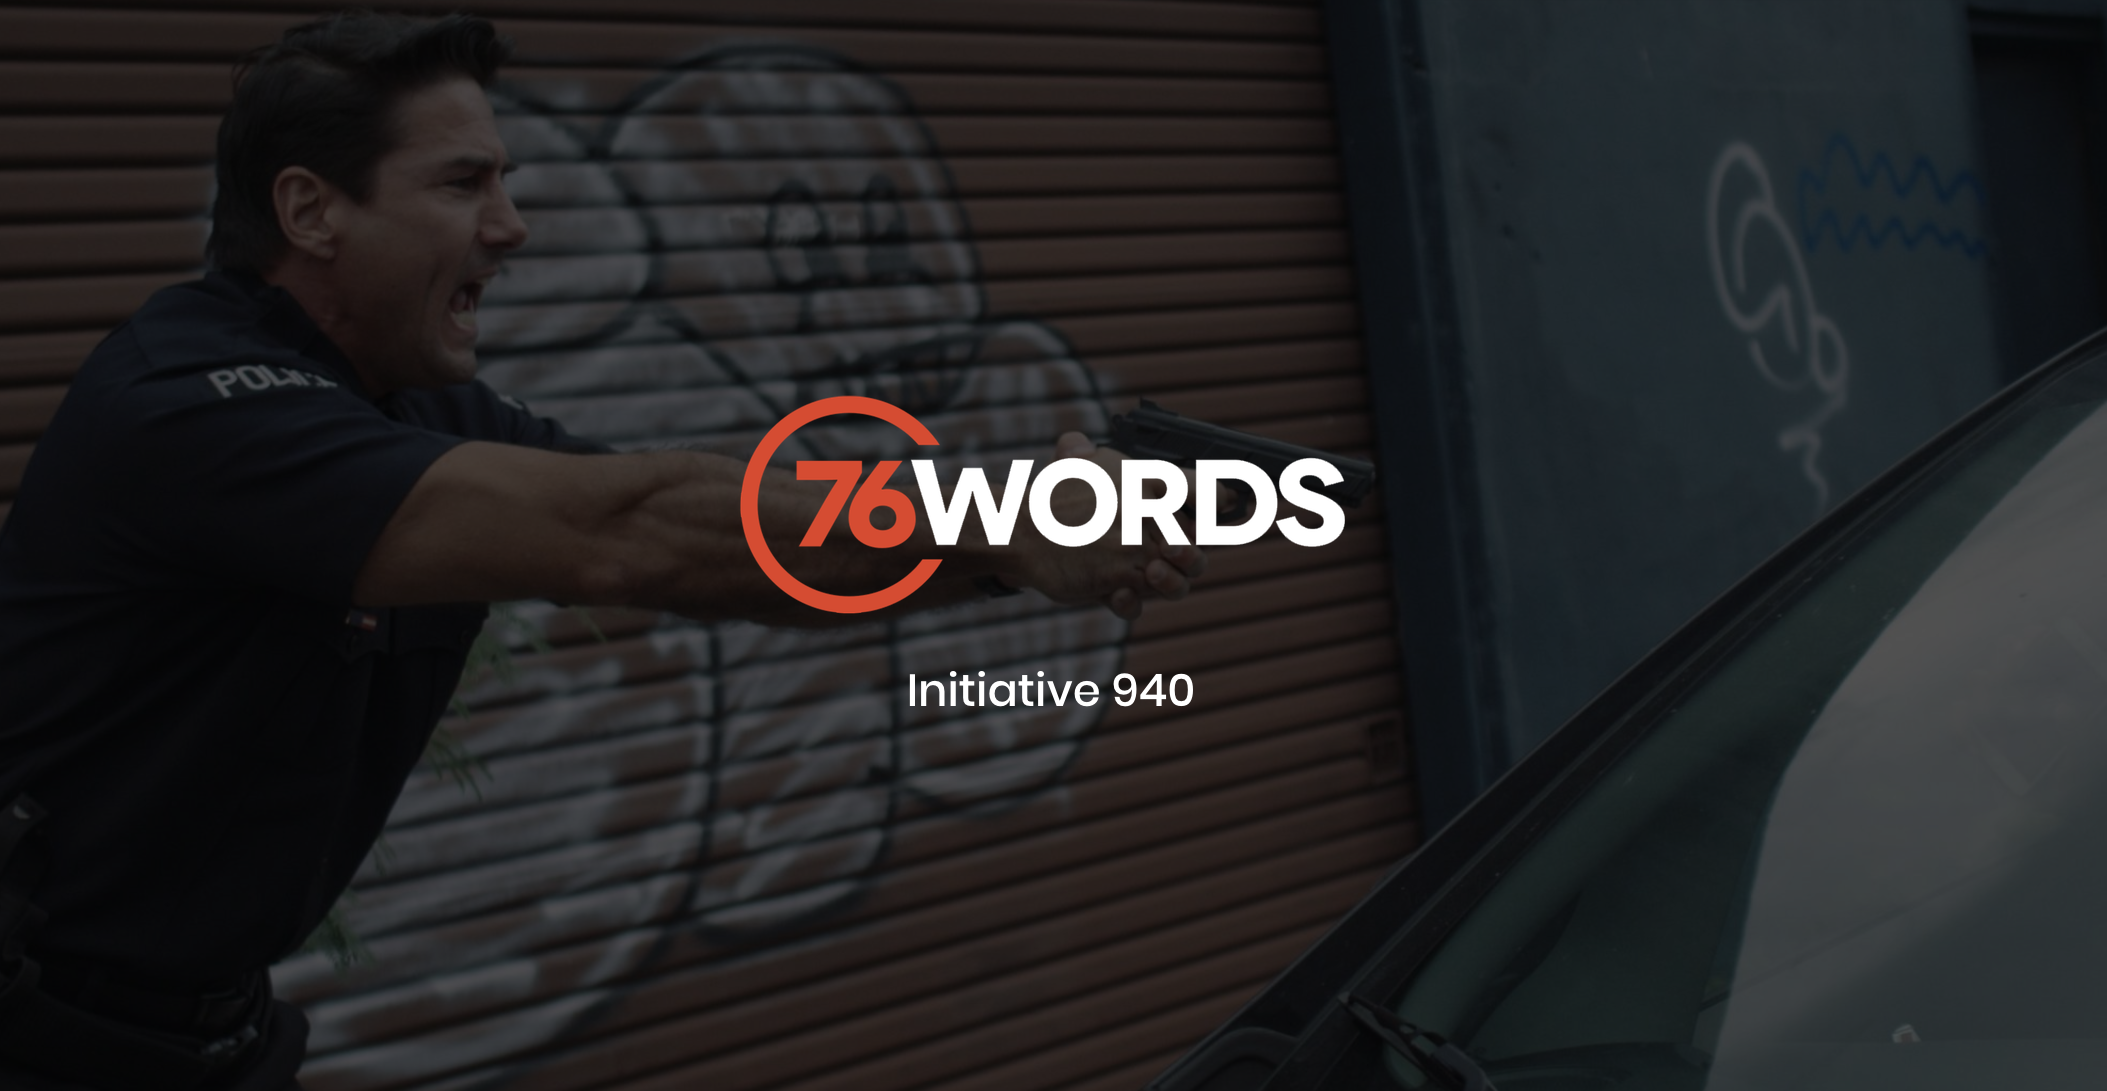 IU C&I Studios Page White and orange 76 Words Initiative 940 logo with a dimmed background of a side profile of an officer with gun drawn yelling at someone in a car with graffiti on a garage door in the background